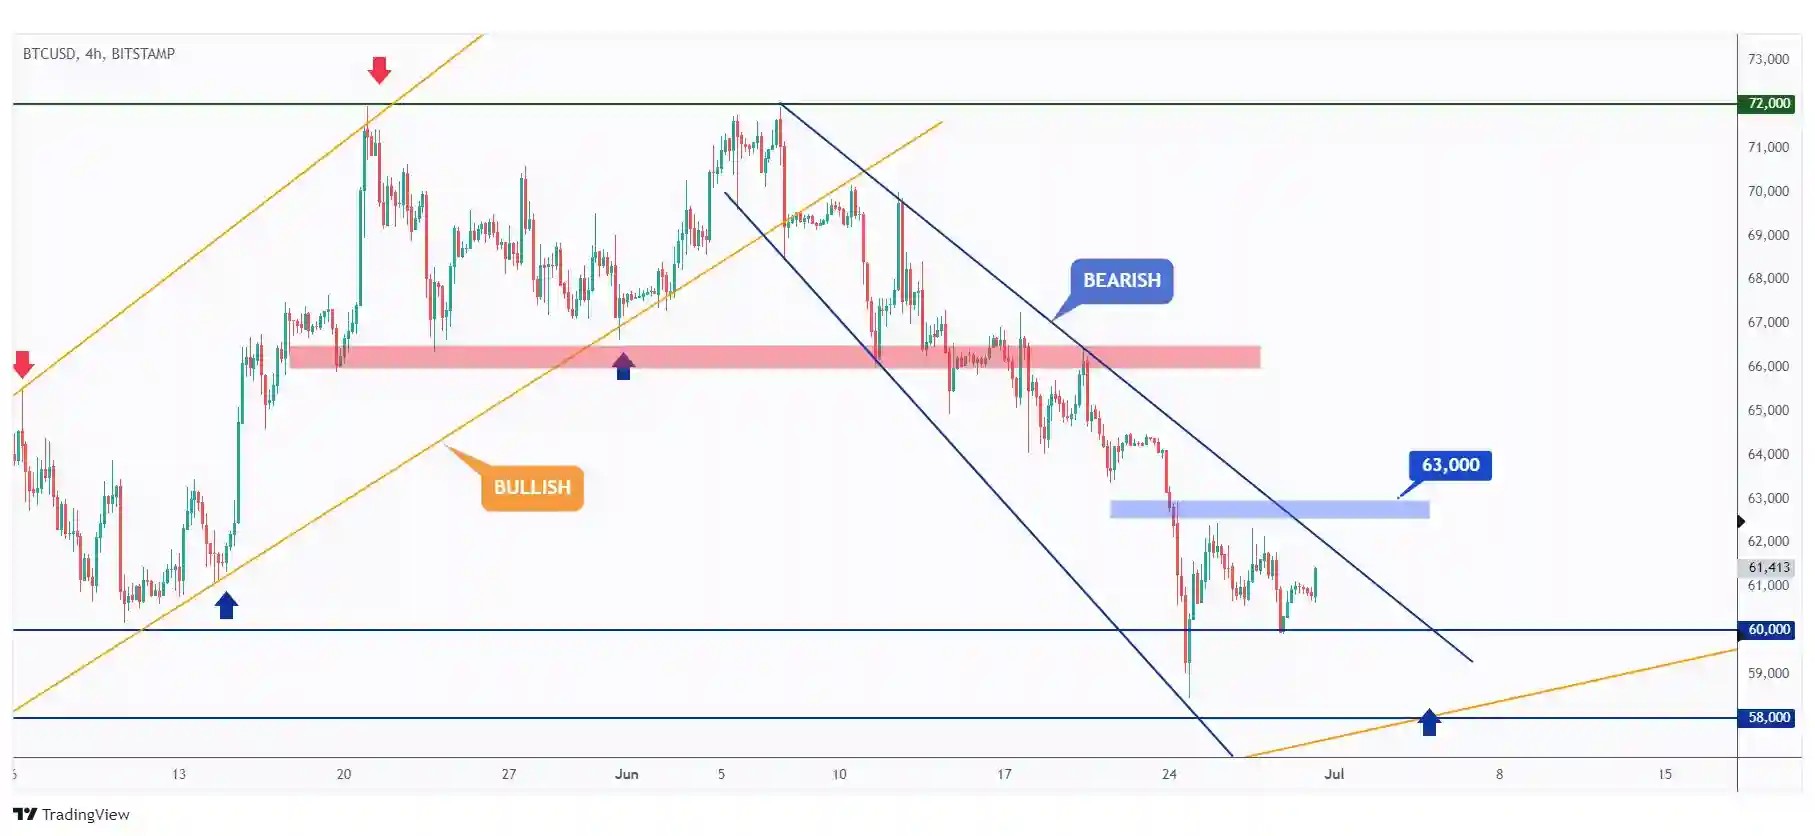 BTC 4h chart overall bearish trading within a falling wedge pattern as long as the last high at $63,000 holds.